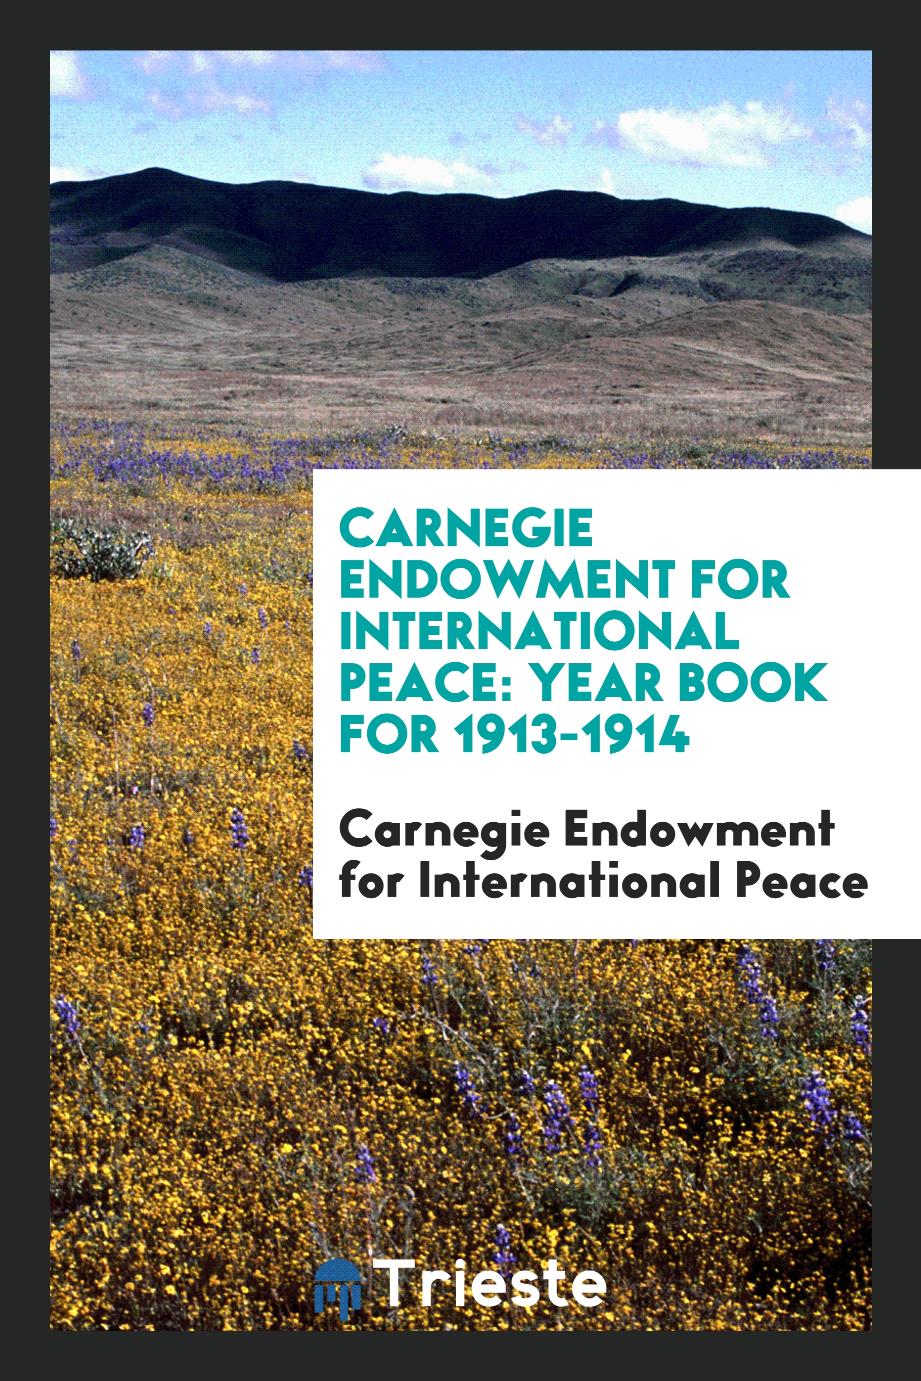 Carnegie Endowment for International Peace: Year Book for 1913-1914